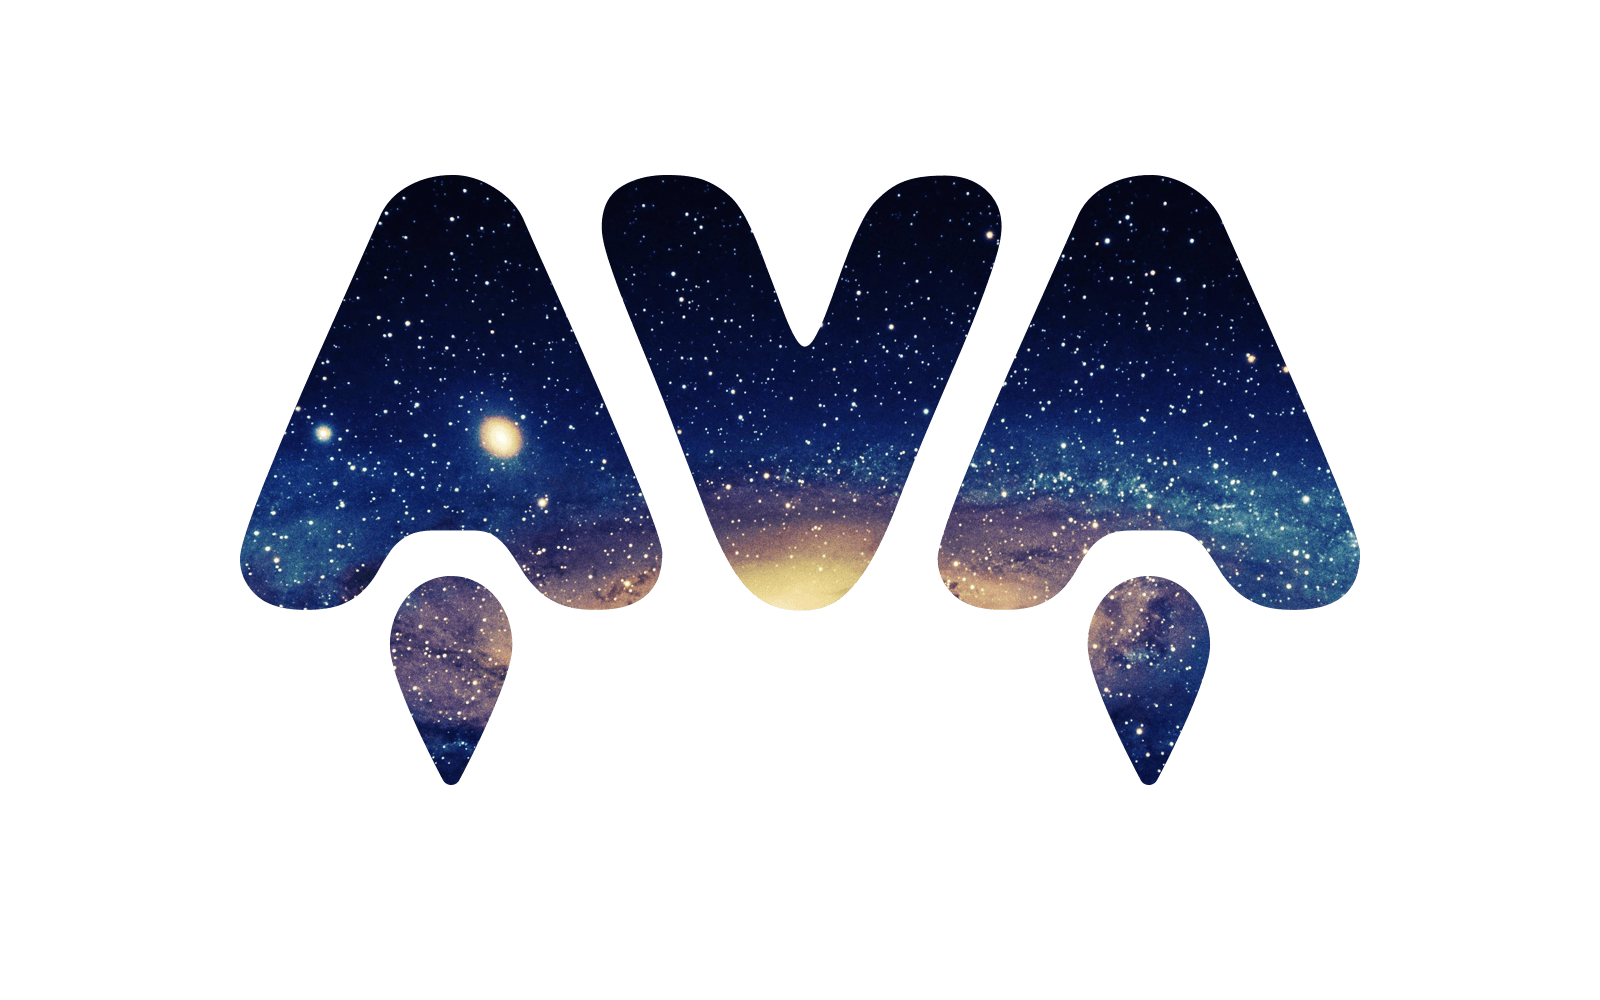 Ava текст